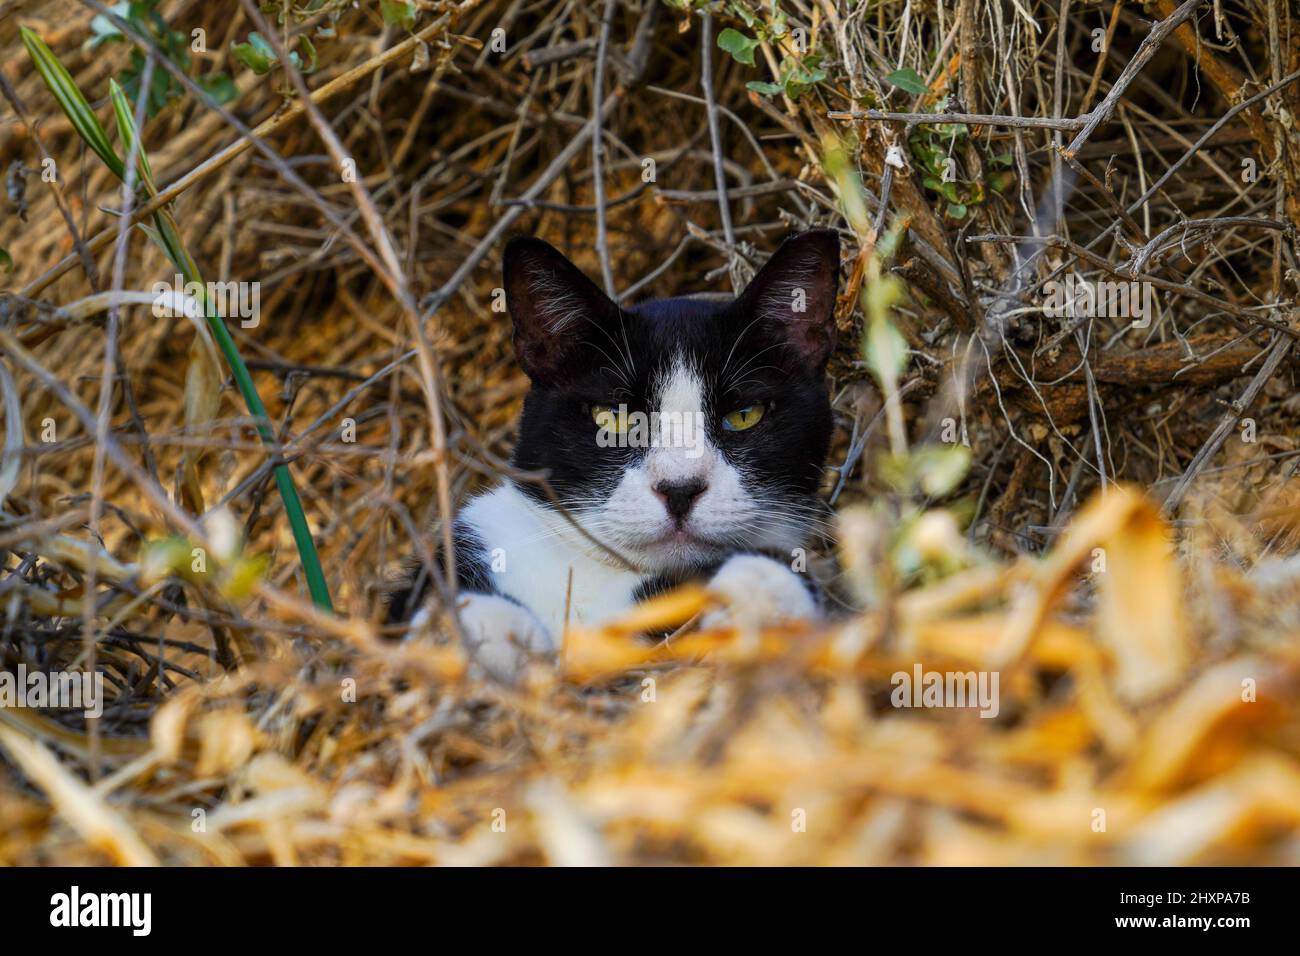 A portrait of a black and white cat looking out from among the plants in a field of garden Stock Photo